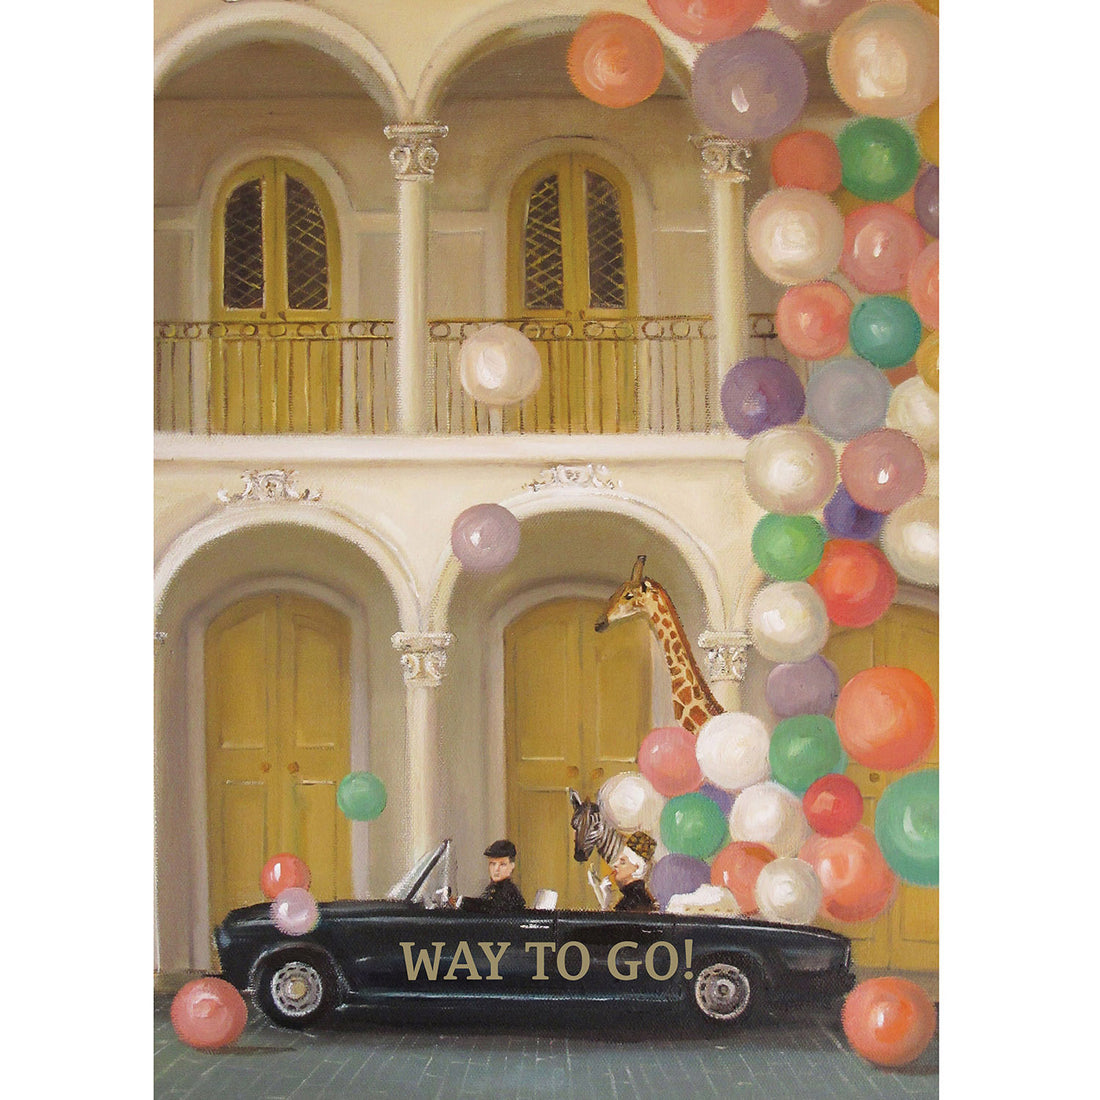 A painterly illustration of a vintage black convertible car parked outside of an estate with corinthian pillars and ornate doors; in the back seat of the car is a woman, a zebra and a giraffe with colorful balls spilling up and out of the back seat like balloons floating away. The message &quot;WAY TO GO!&quot; is printed in gold over the black car.